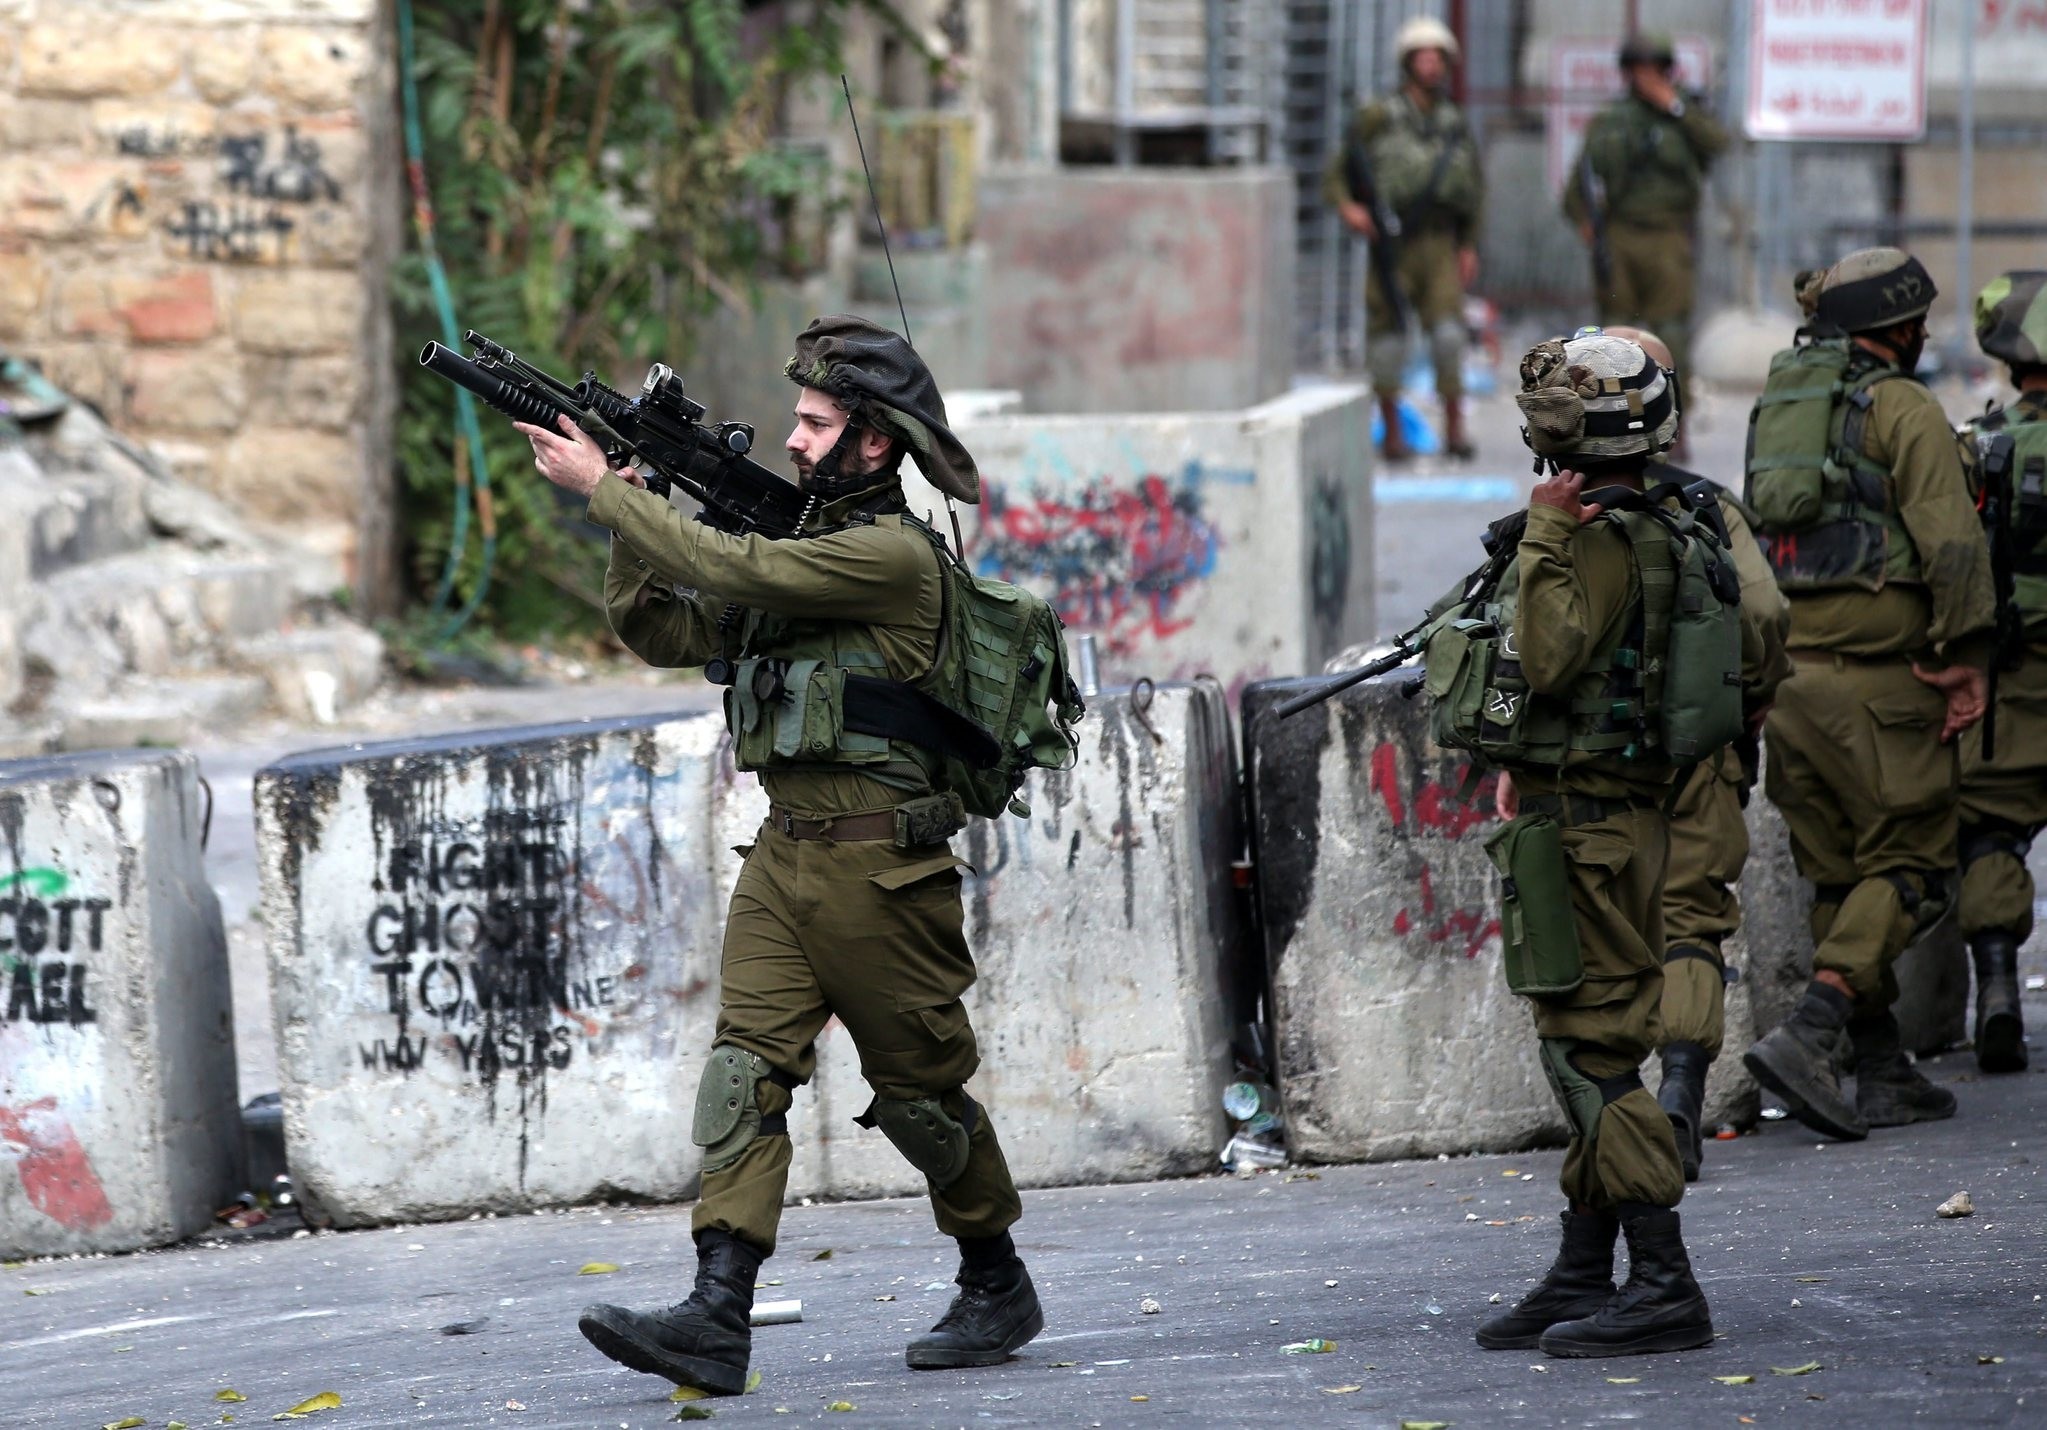 Israeli soldiers take up position during clashes with Palestinian protesters in the West Bank city of Hebron, 19 October 2015. (EPA Photo)